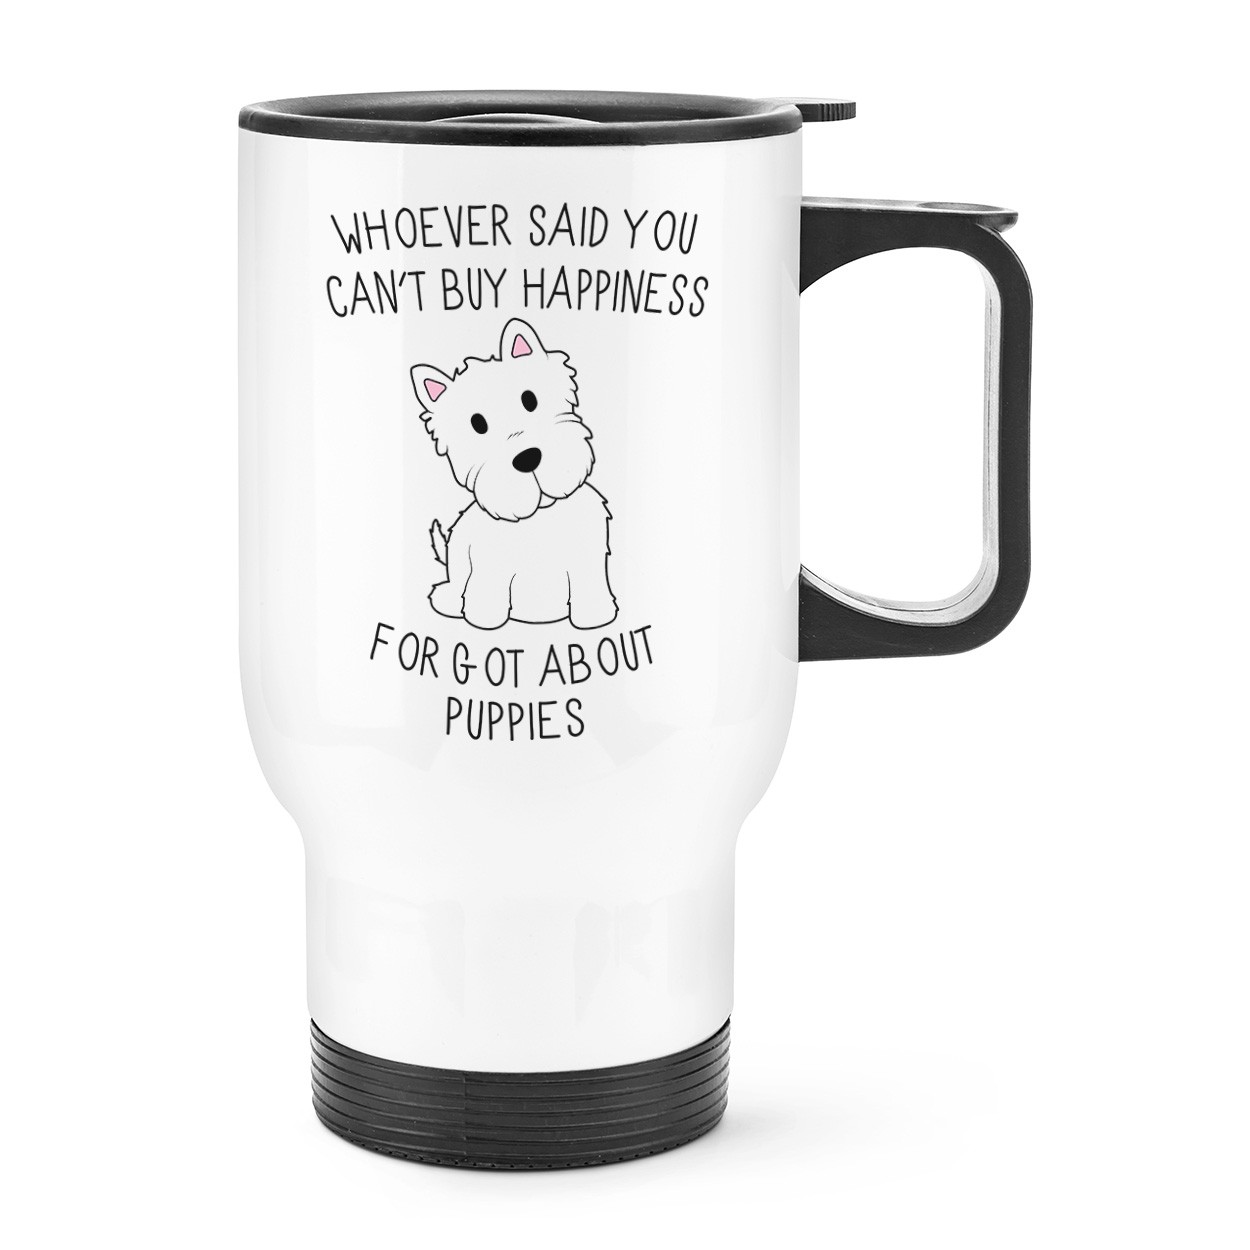 Whoever Said You Can't Buy Happiness Forgot About Puppies Travel Mug Cup With Handle